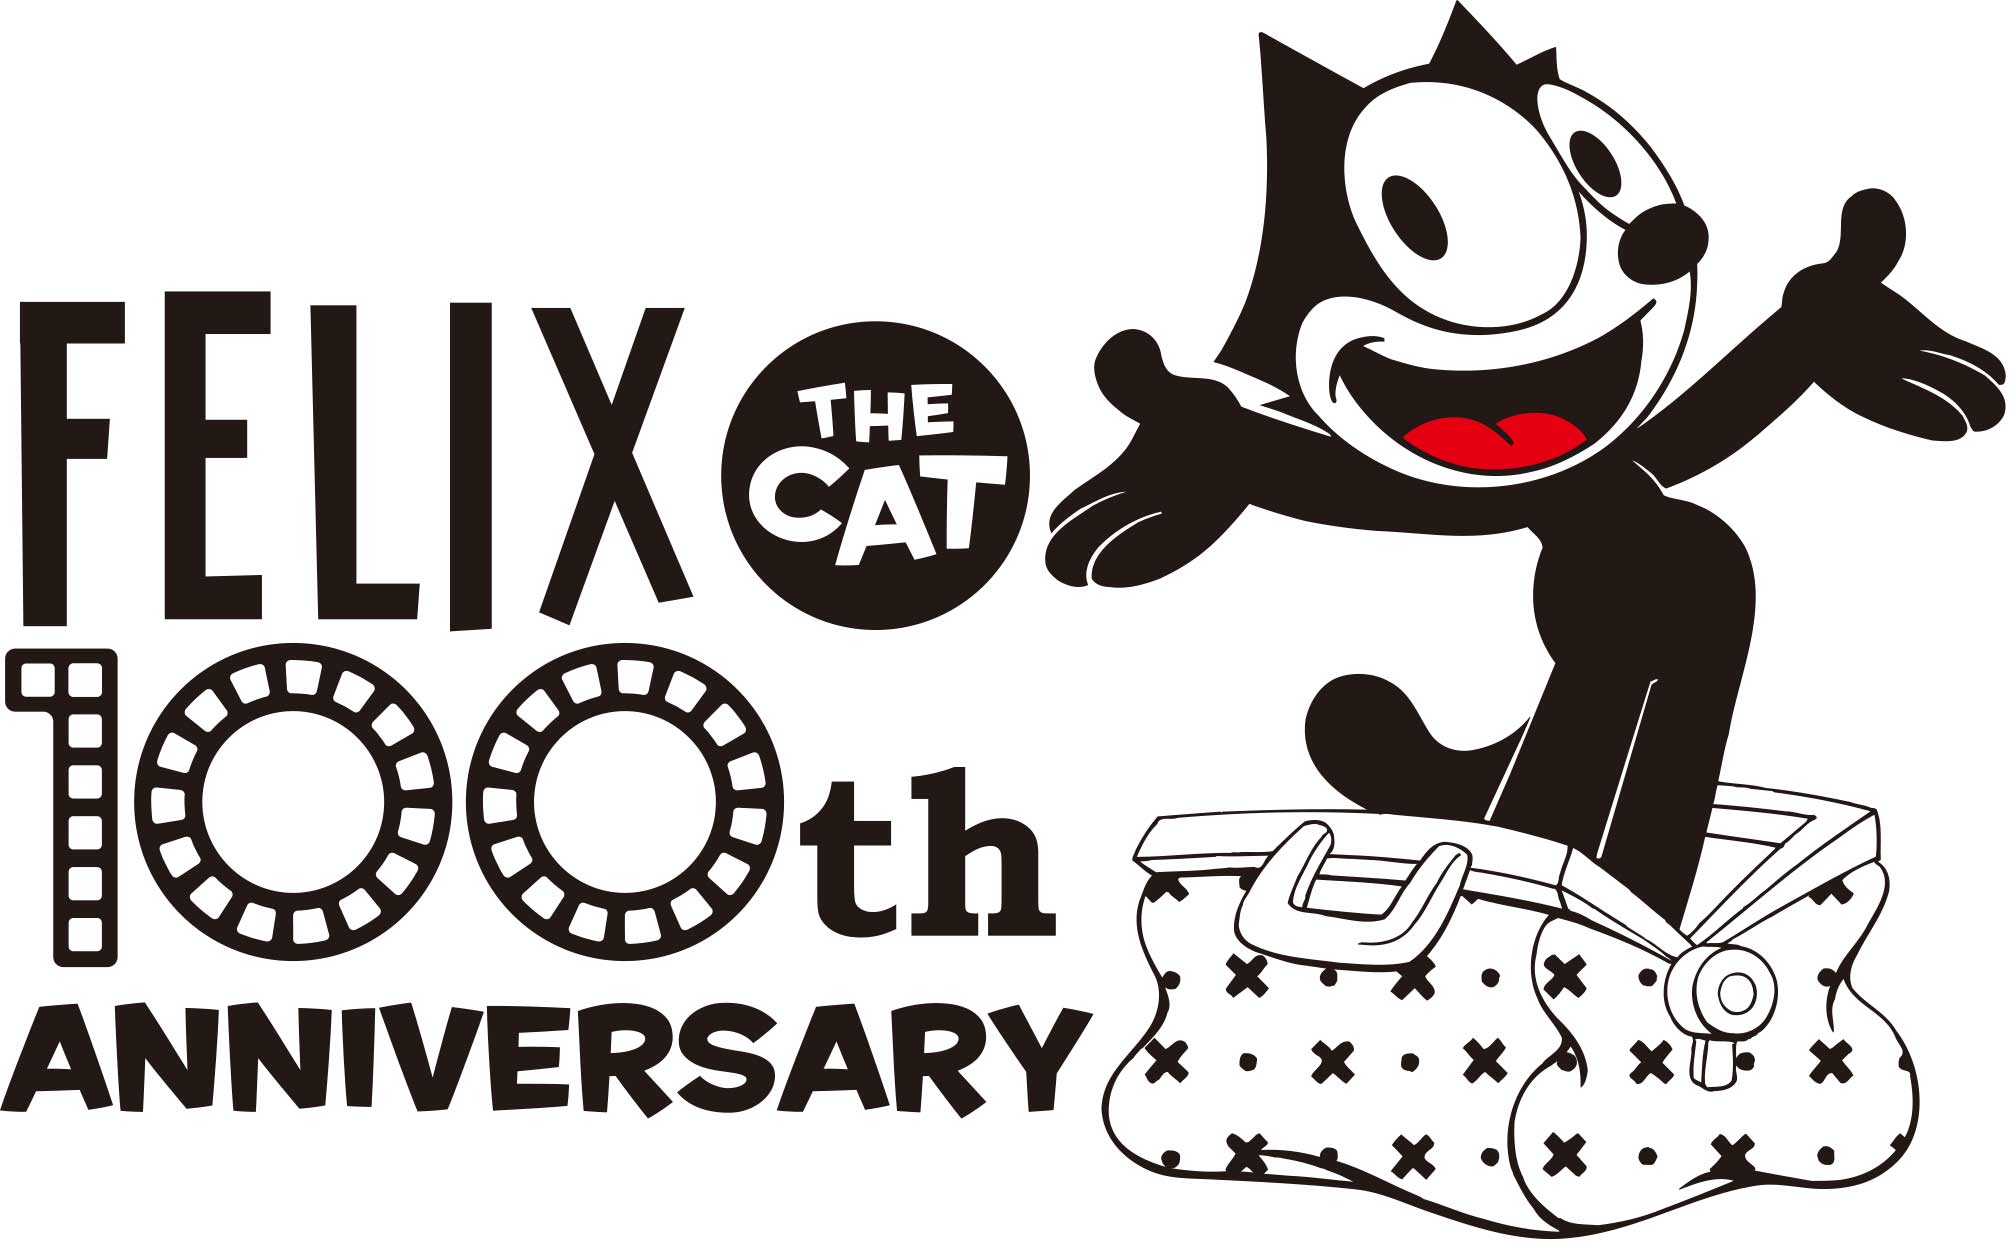 Felix the Cat nominated in the 2019 International Licensing Awards